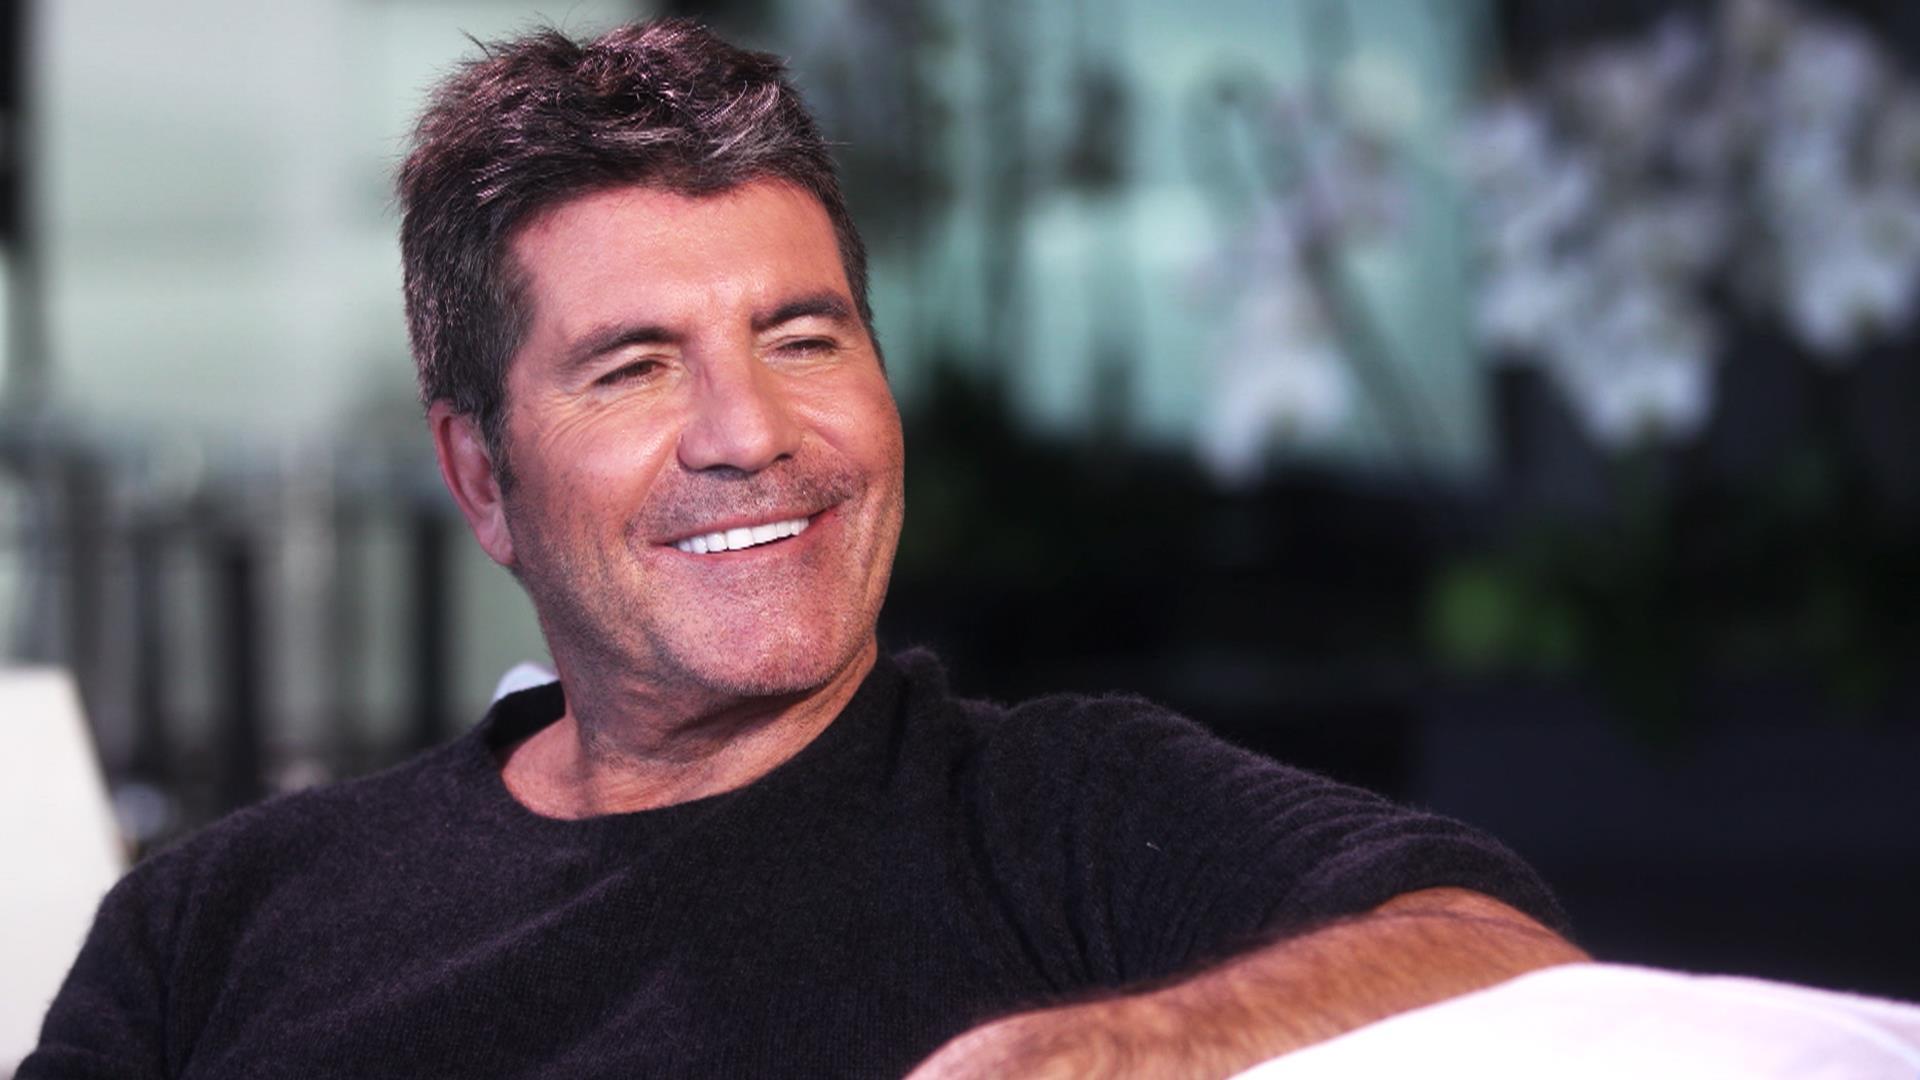 Simon Cowell says he will not be returning to 'American Idol